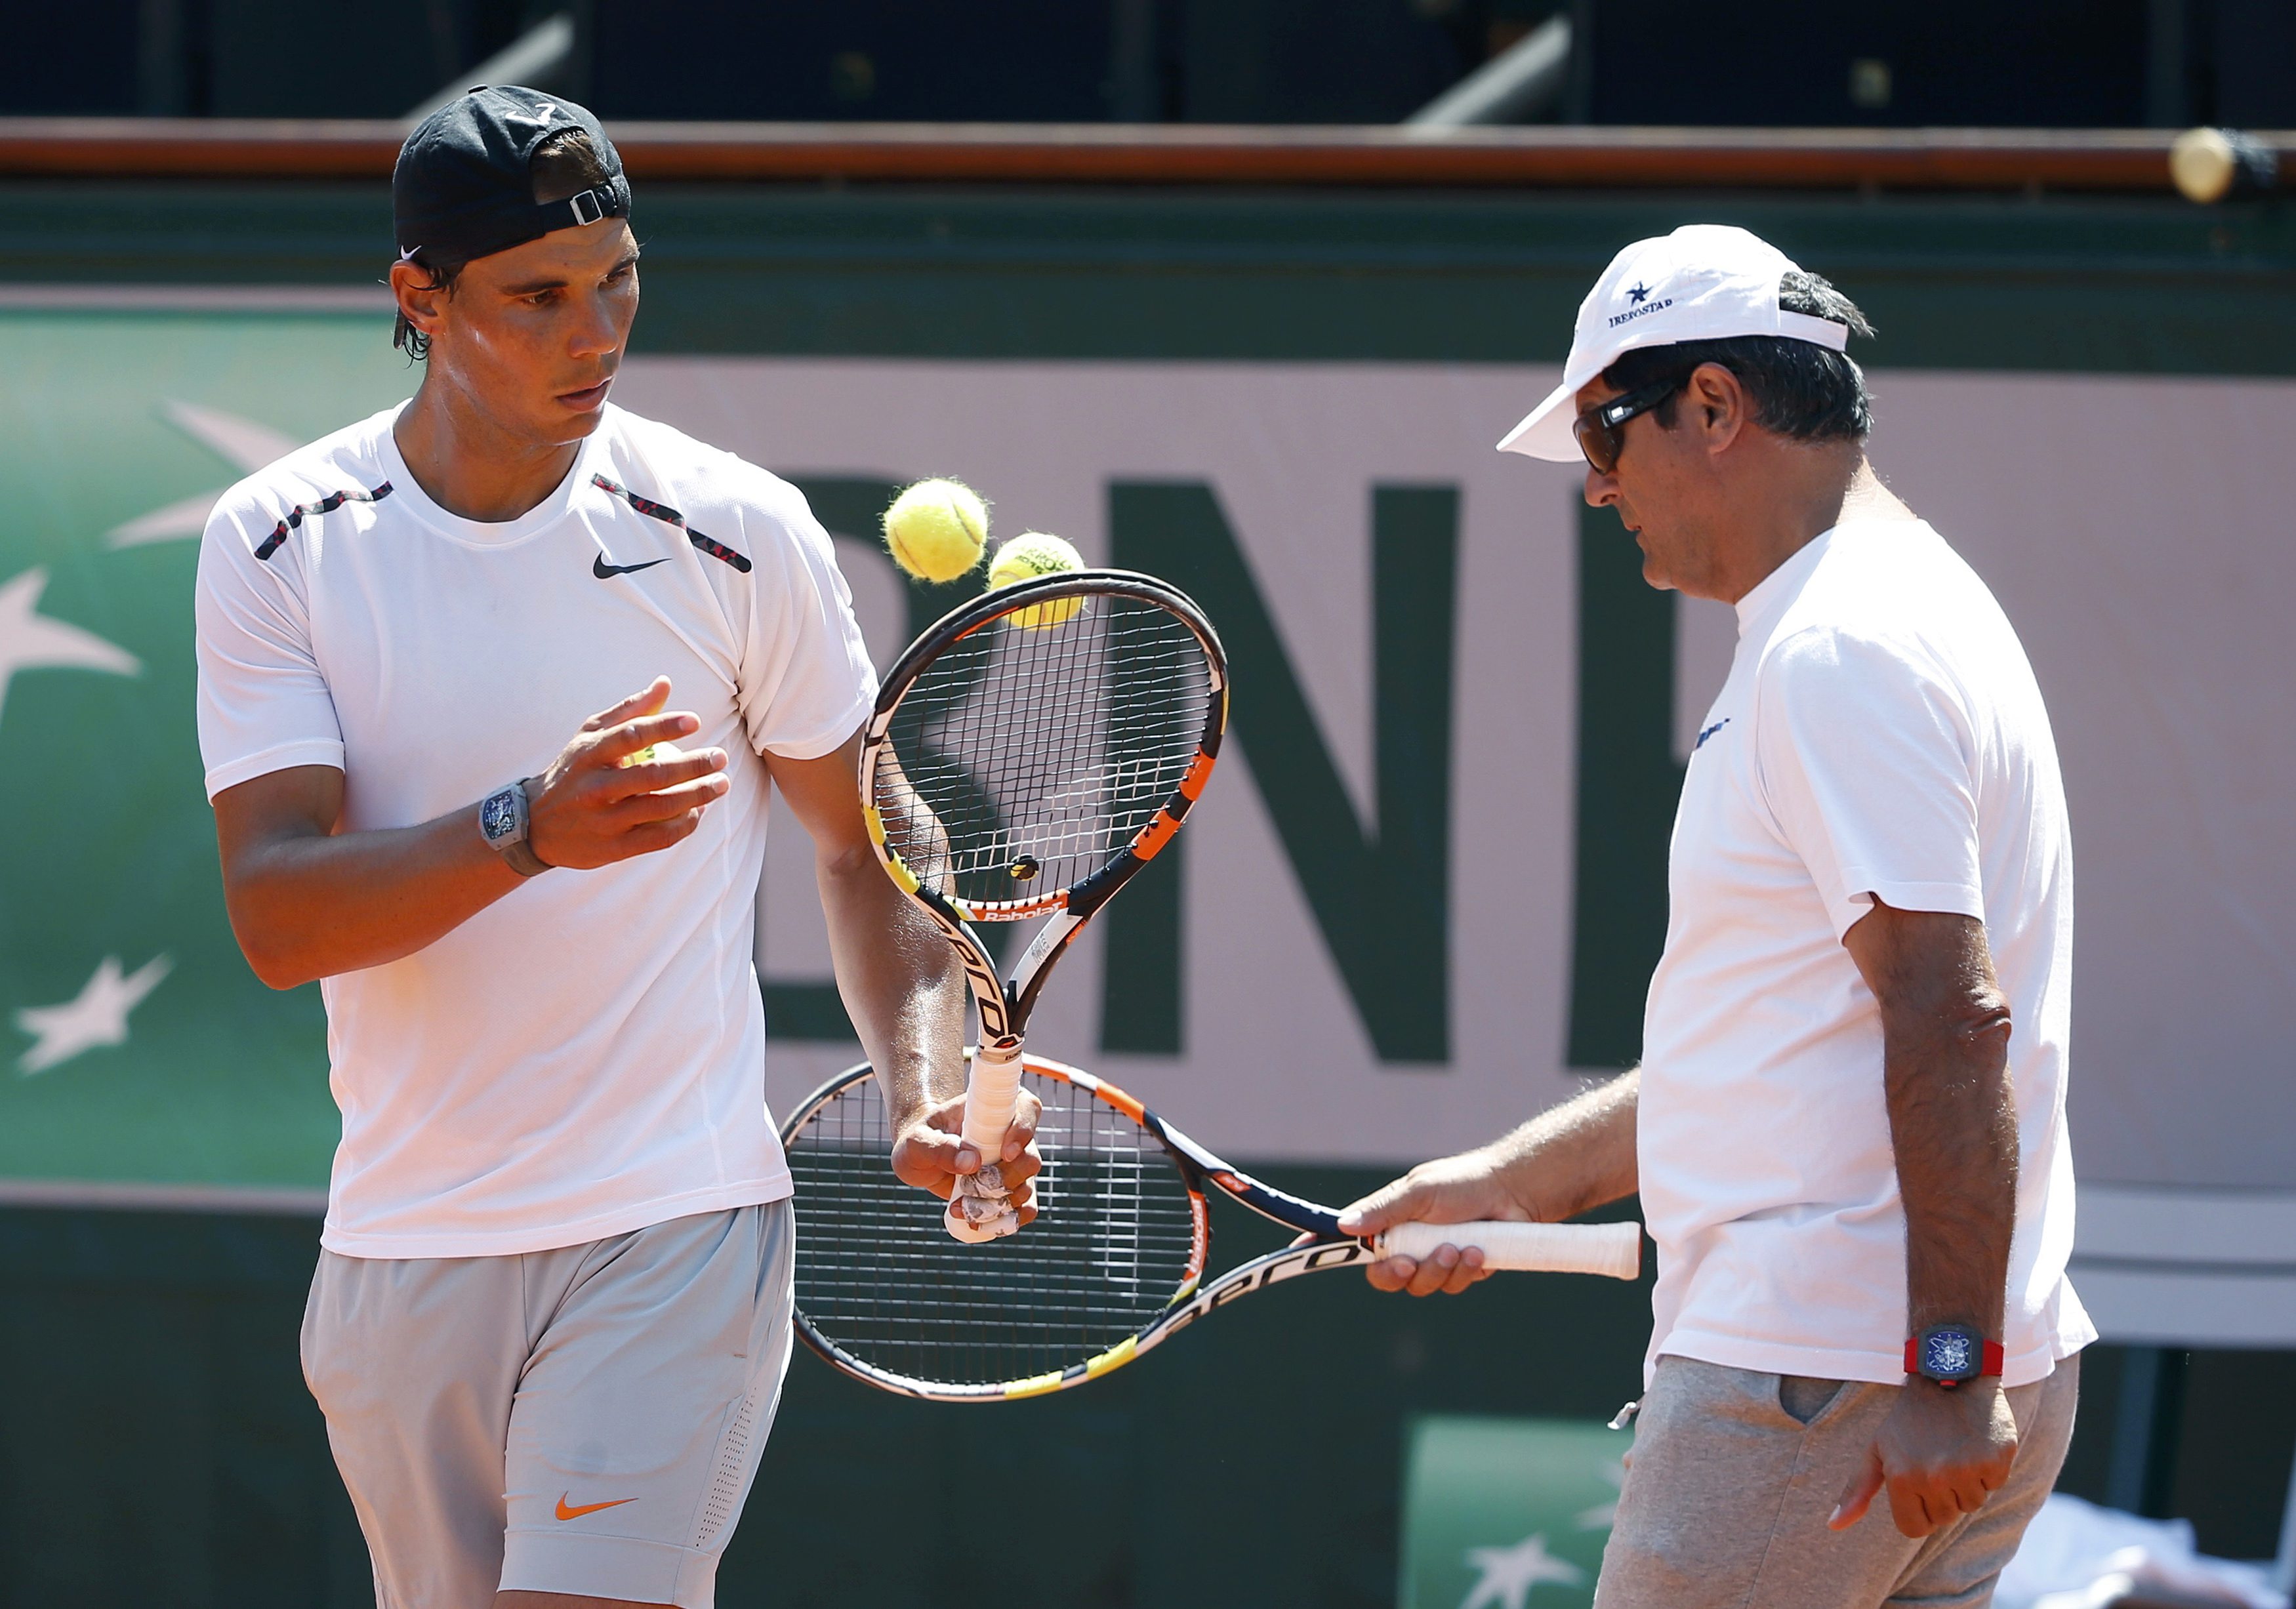 PHOTOS: Rafael Nadal Practices At French Open – Rafael Nadal Fans